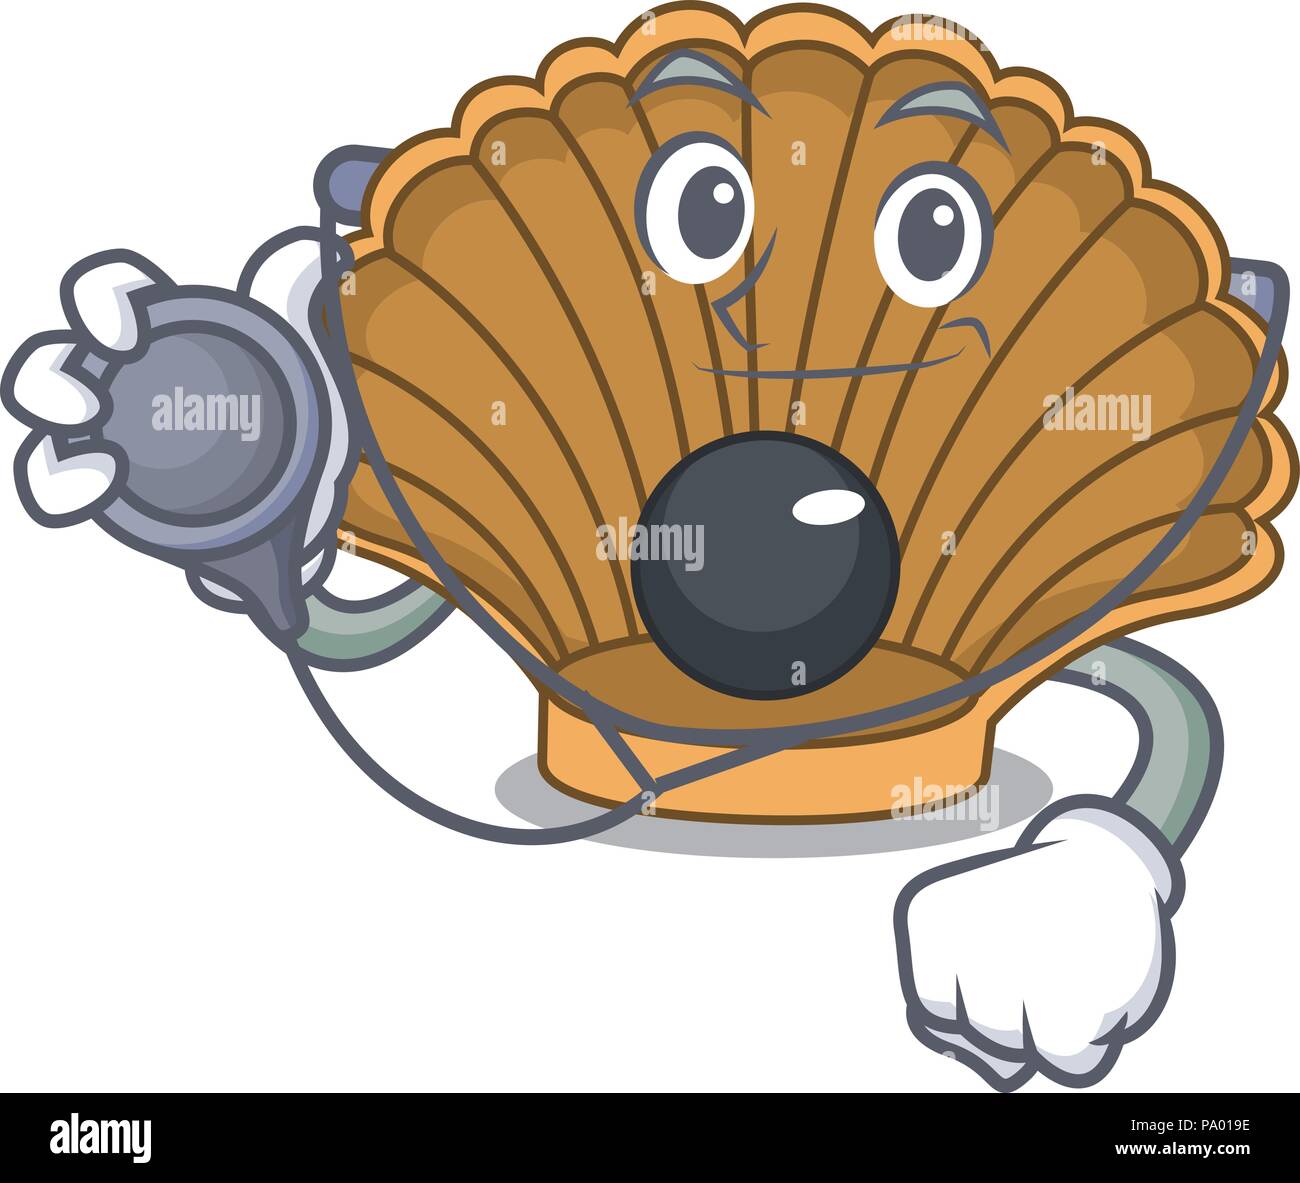 Doctor shell with pearl character cartoon Stock Vector